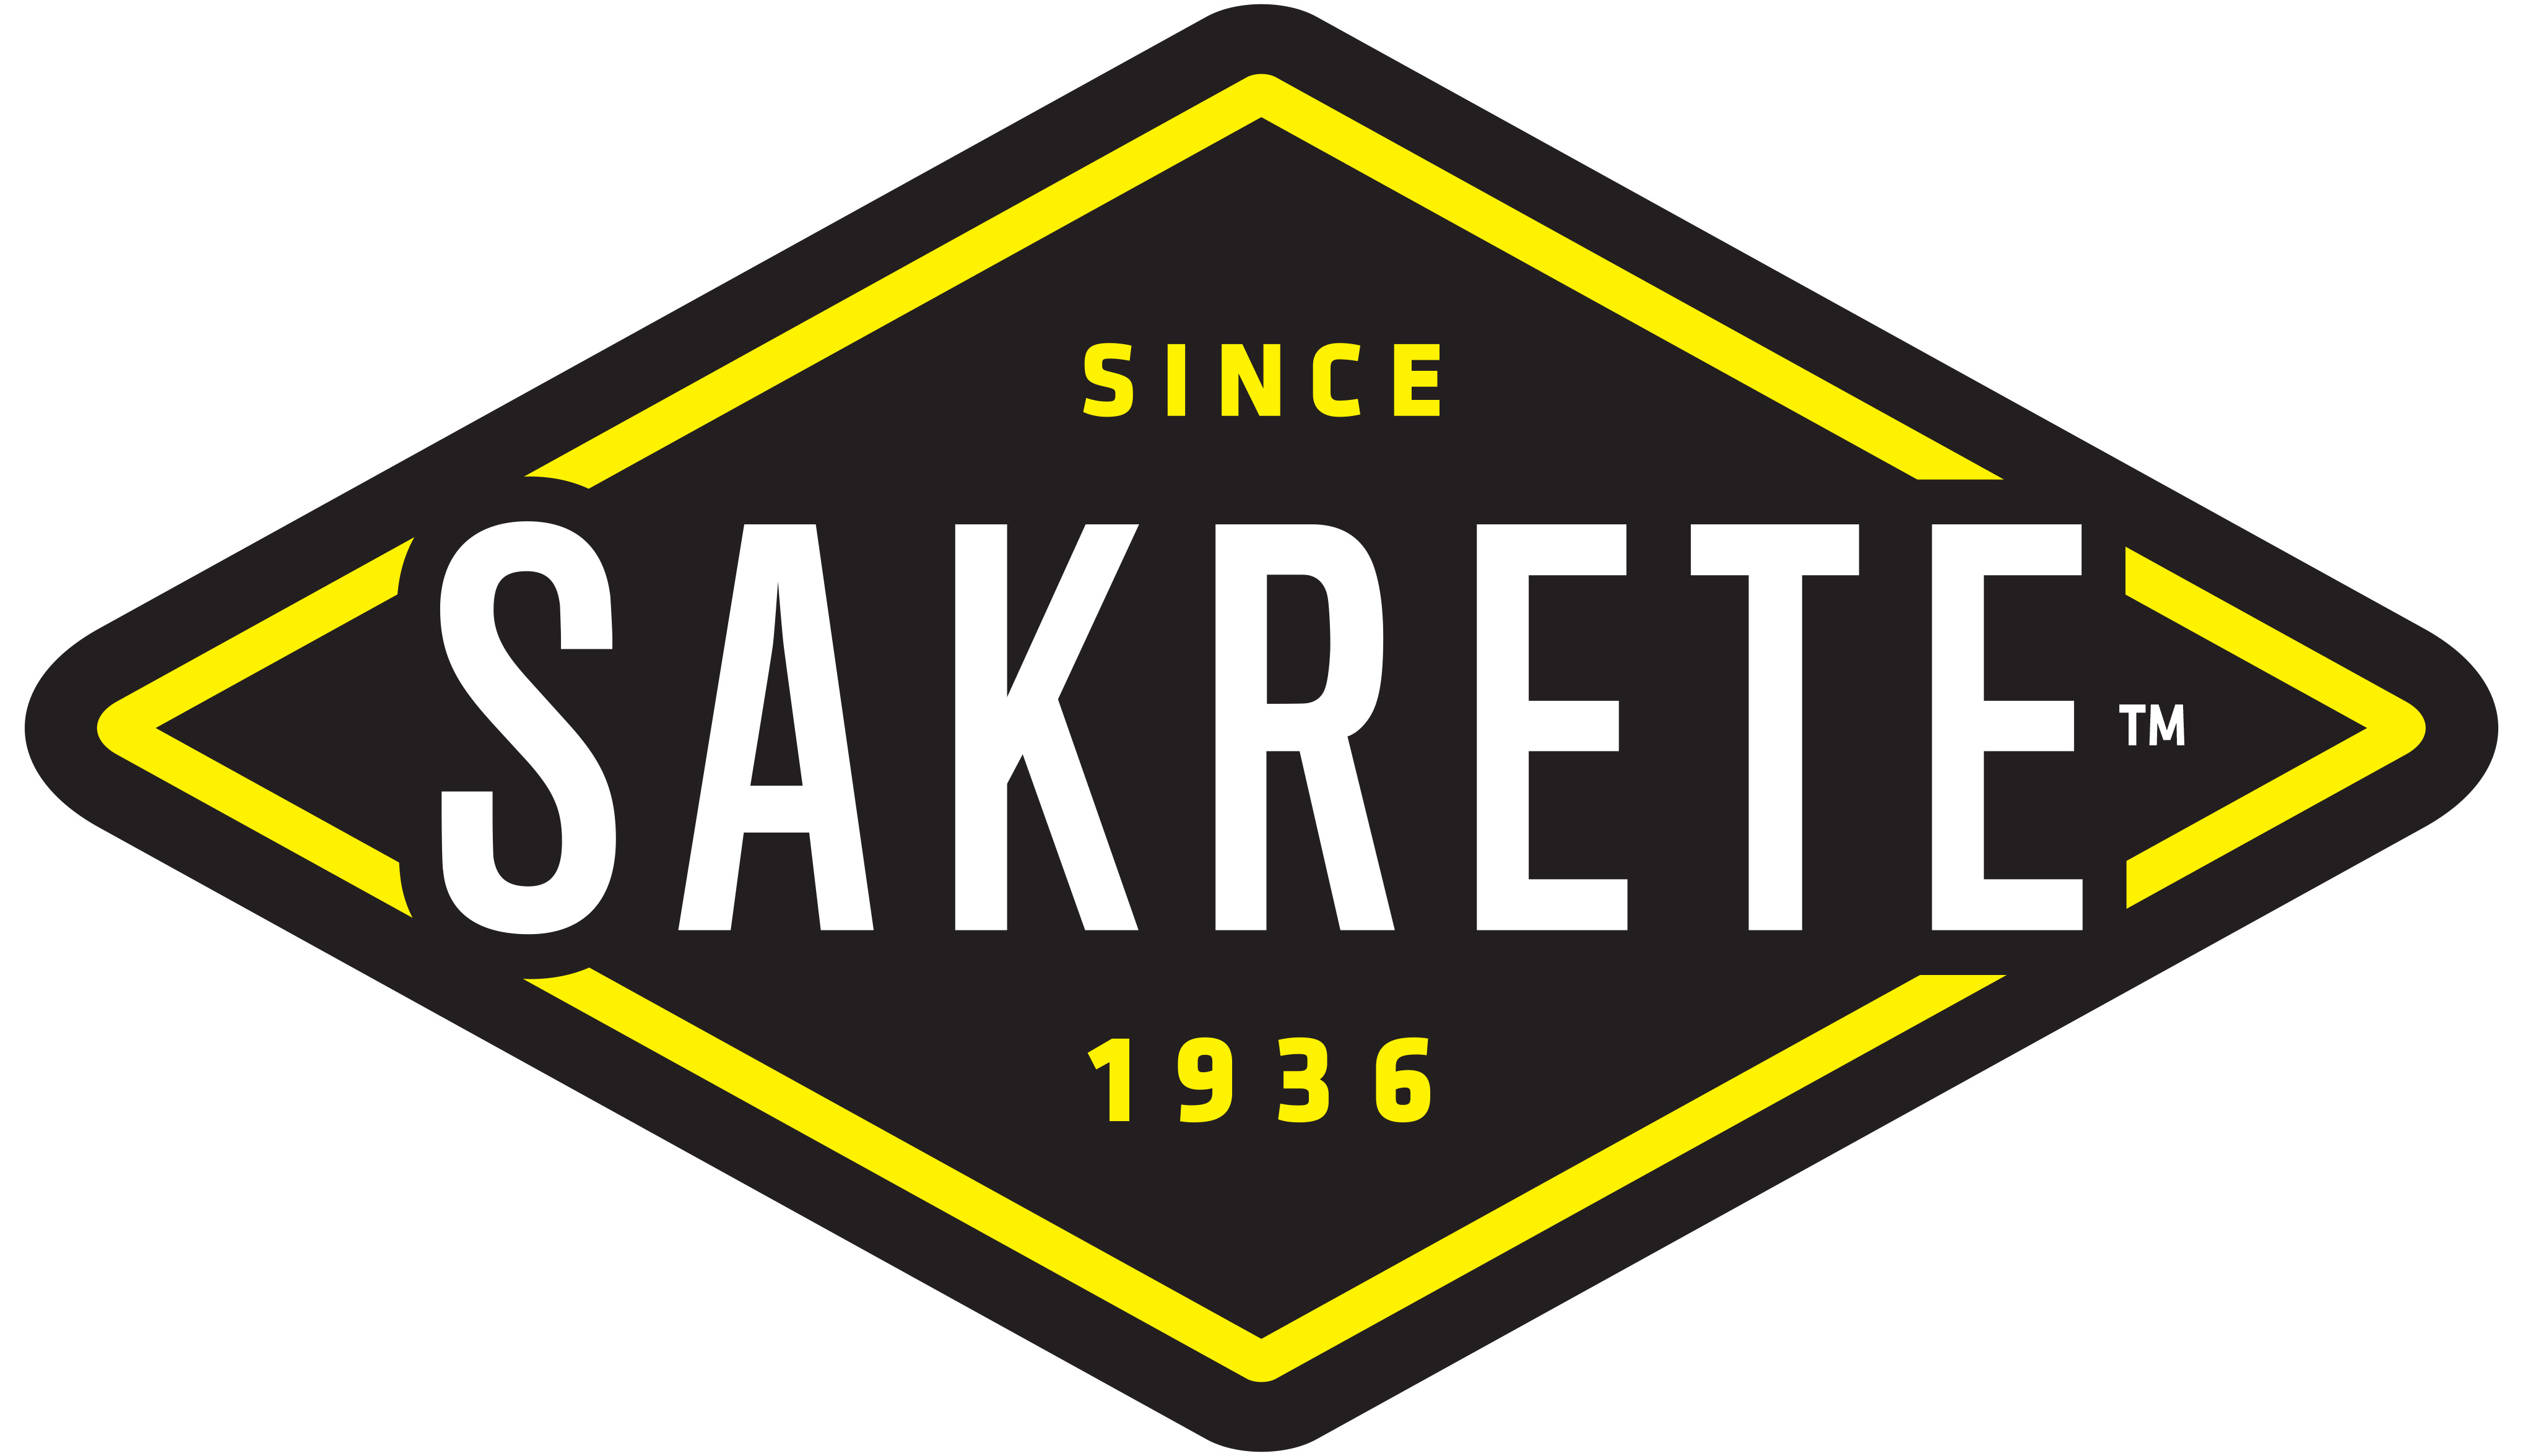 SAKRETE® Celebrates 80 Years as Pioneering Bagged-Concrete Brand with